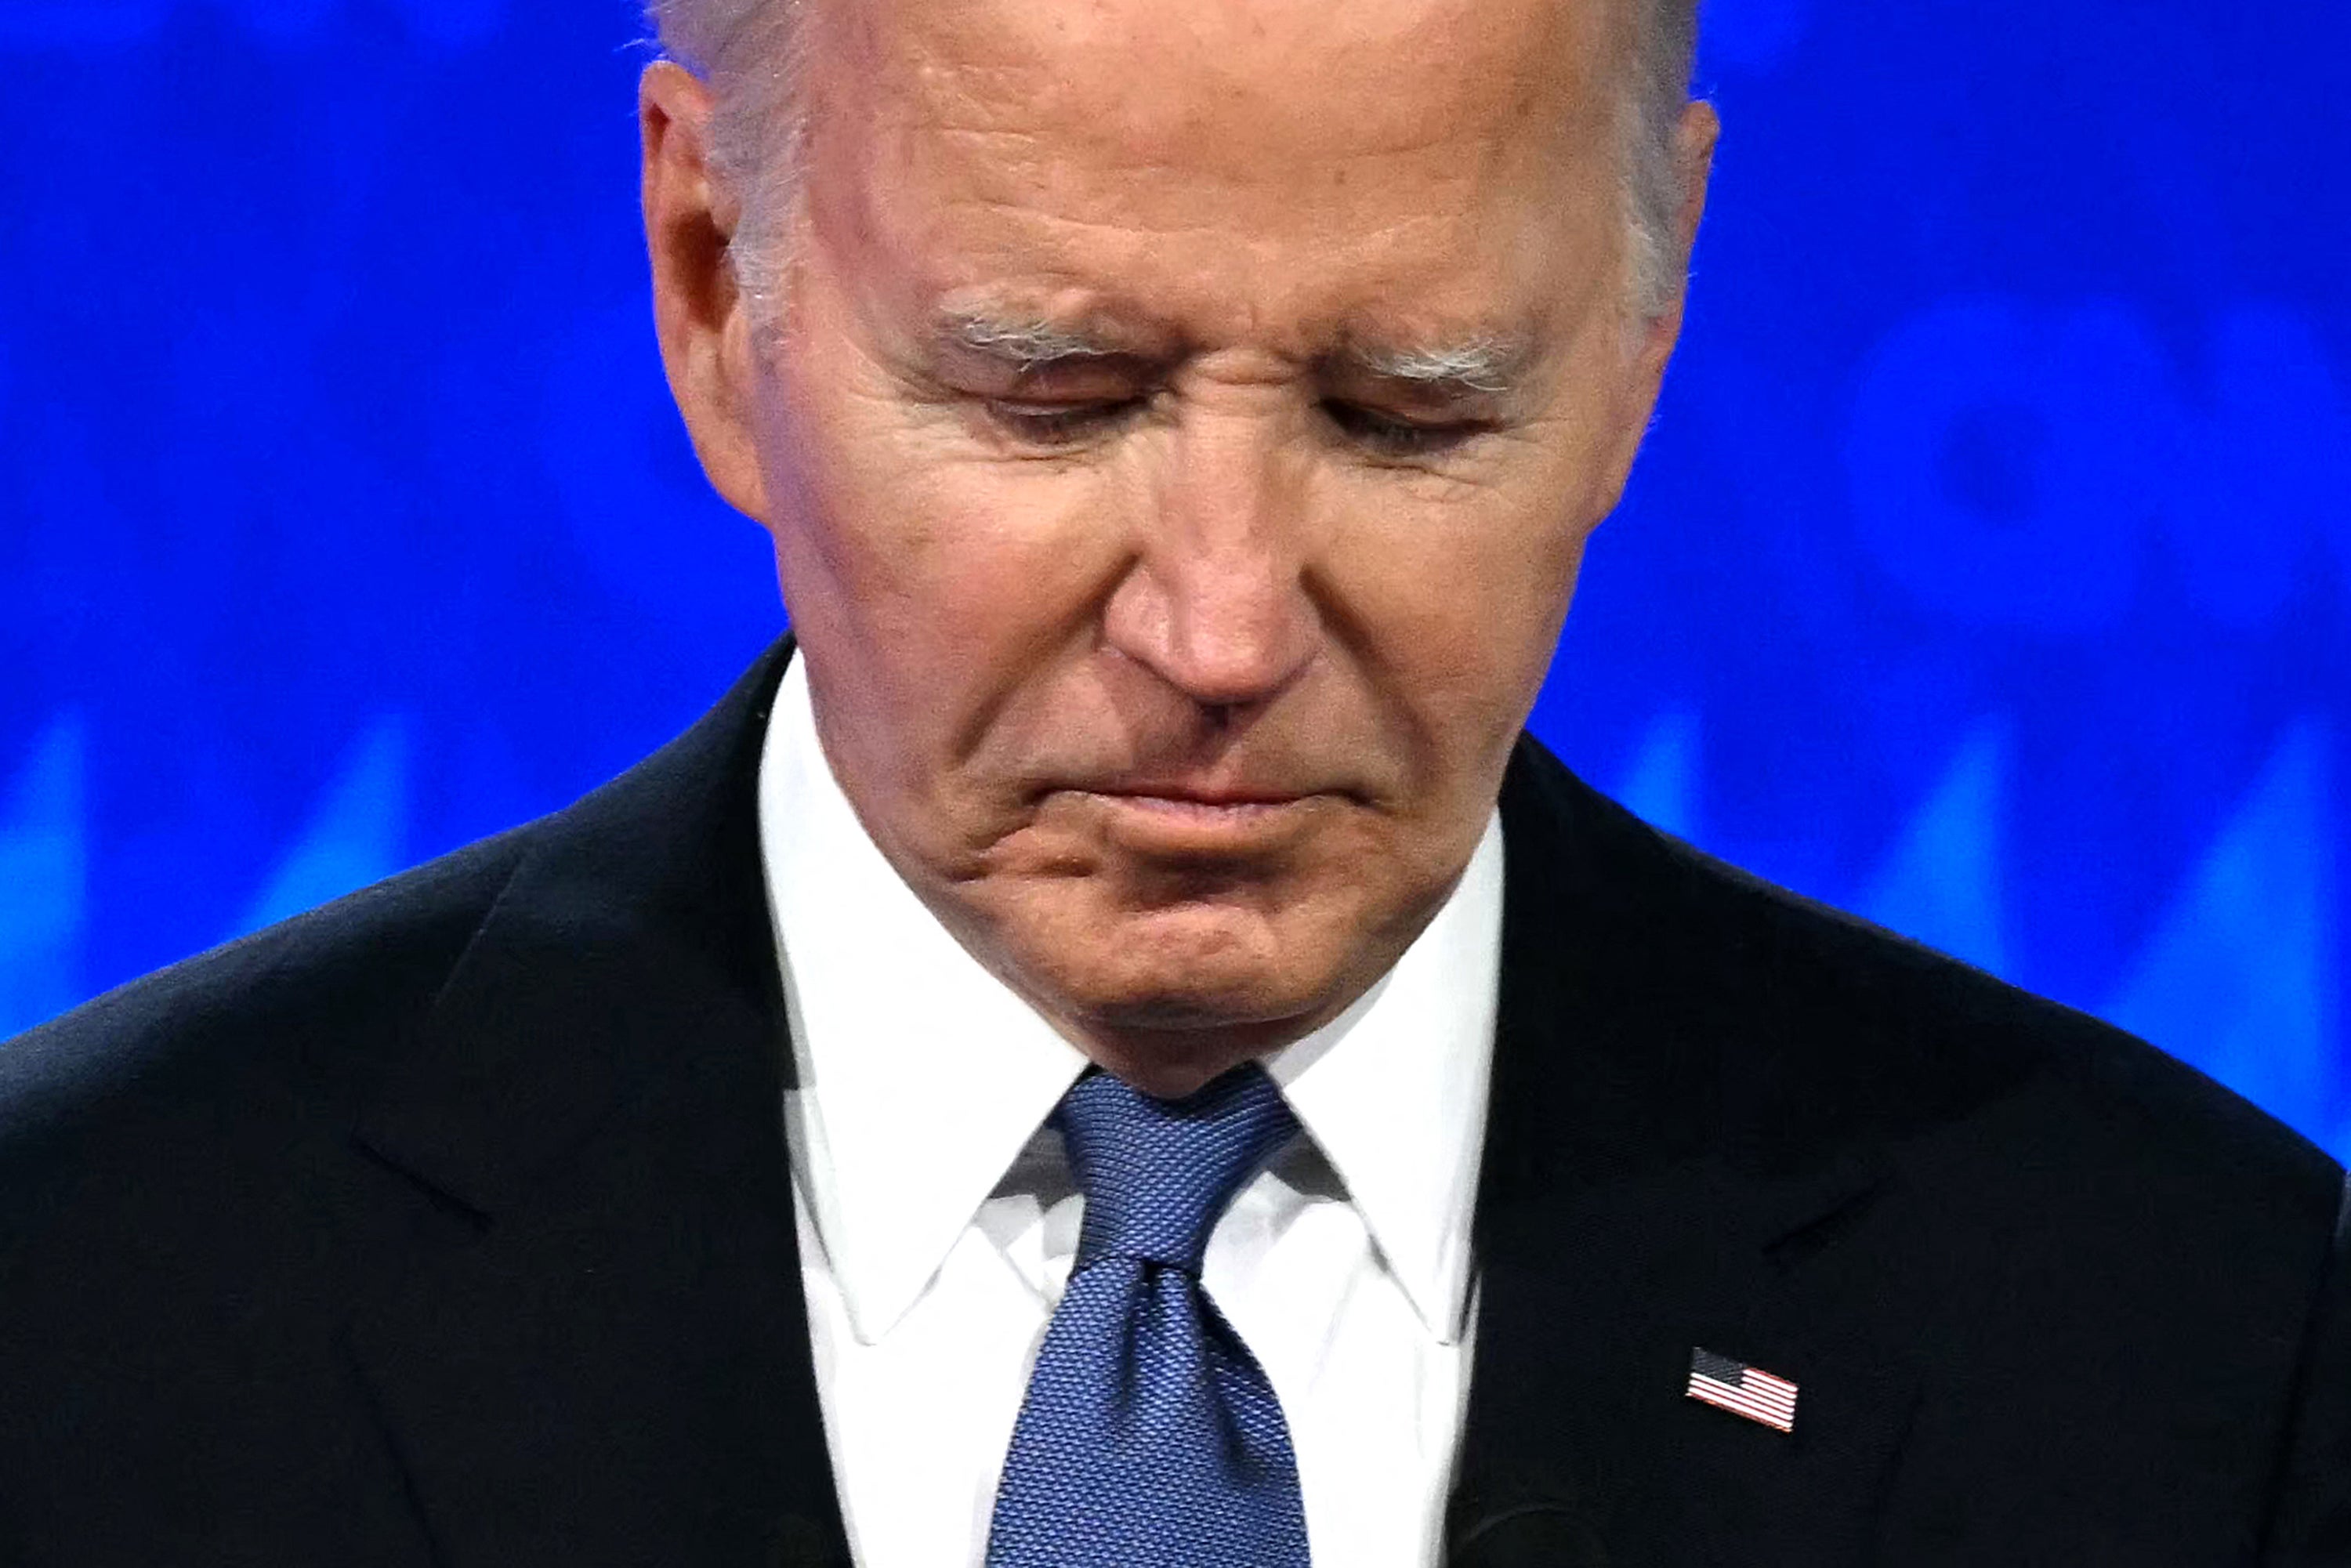 One day after President Joe Biden stammered through his debate performance, disappointed Democrats are questioning whether Biden should be the choice in November